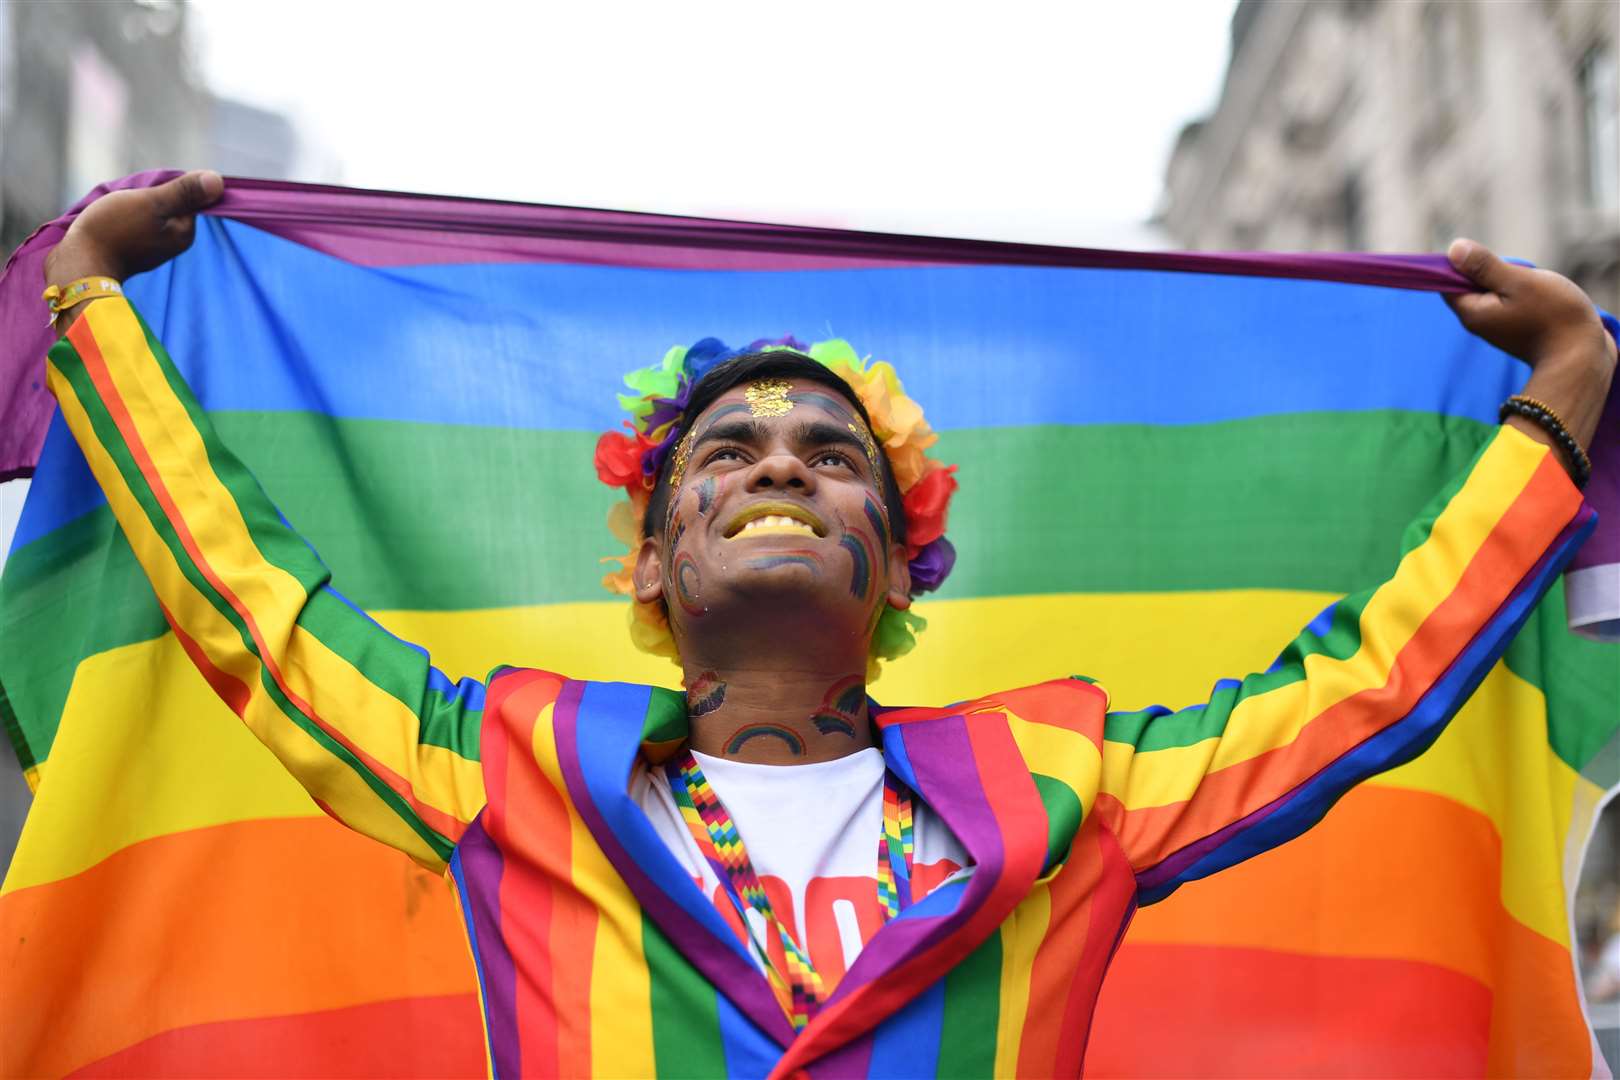 The Pride in London Parade in central London has not been held since the outbreak of the pandemic (Dominic Lipinski/PA)